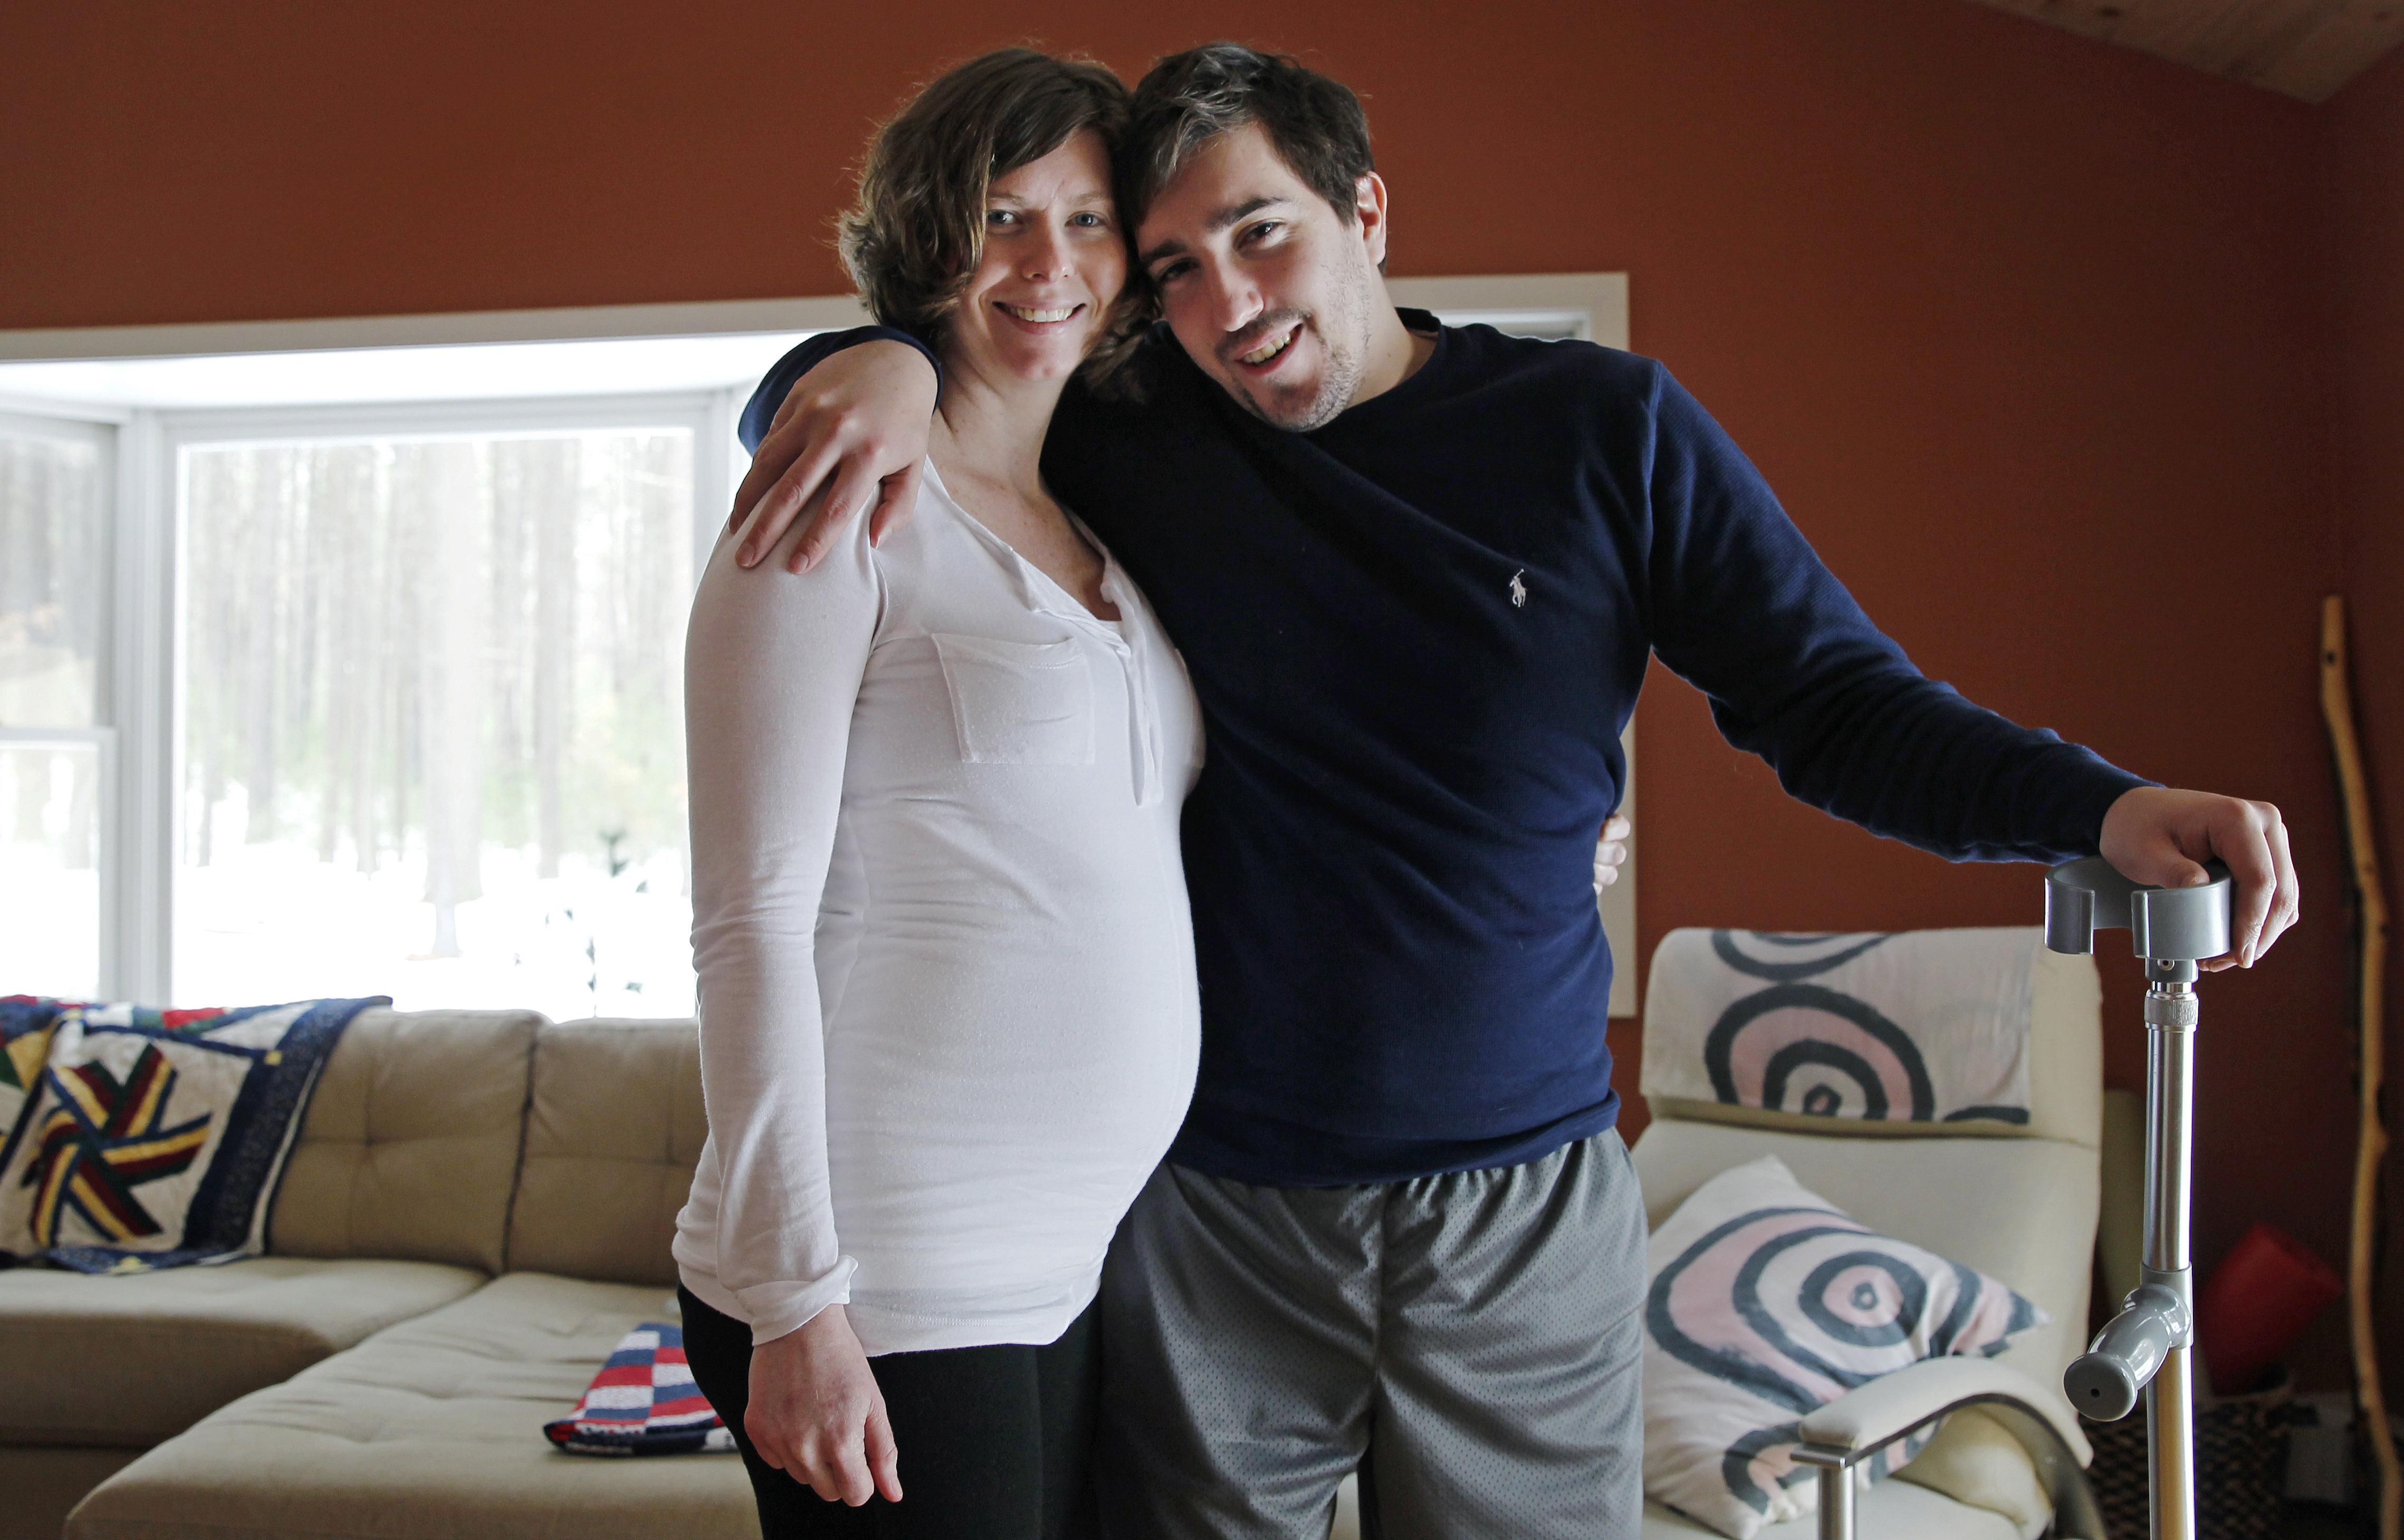  In this March 14, 2014 photo, Jeff Bauman, who lost both his legs above the knee in the Boston Marathon bombing, poses with his fiancee Erin Hurley at their Carlisle, Mass., home. (AP Photo/Charles Krupa)